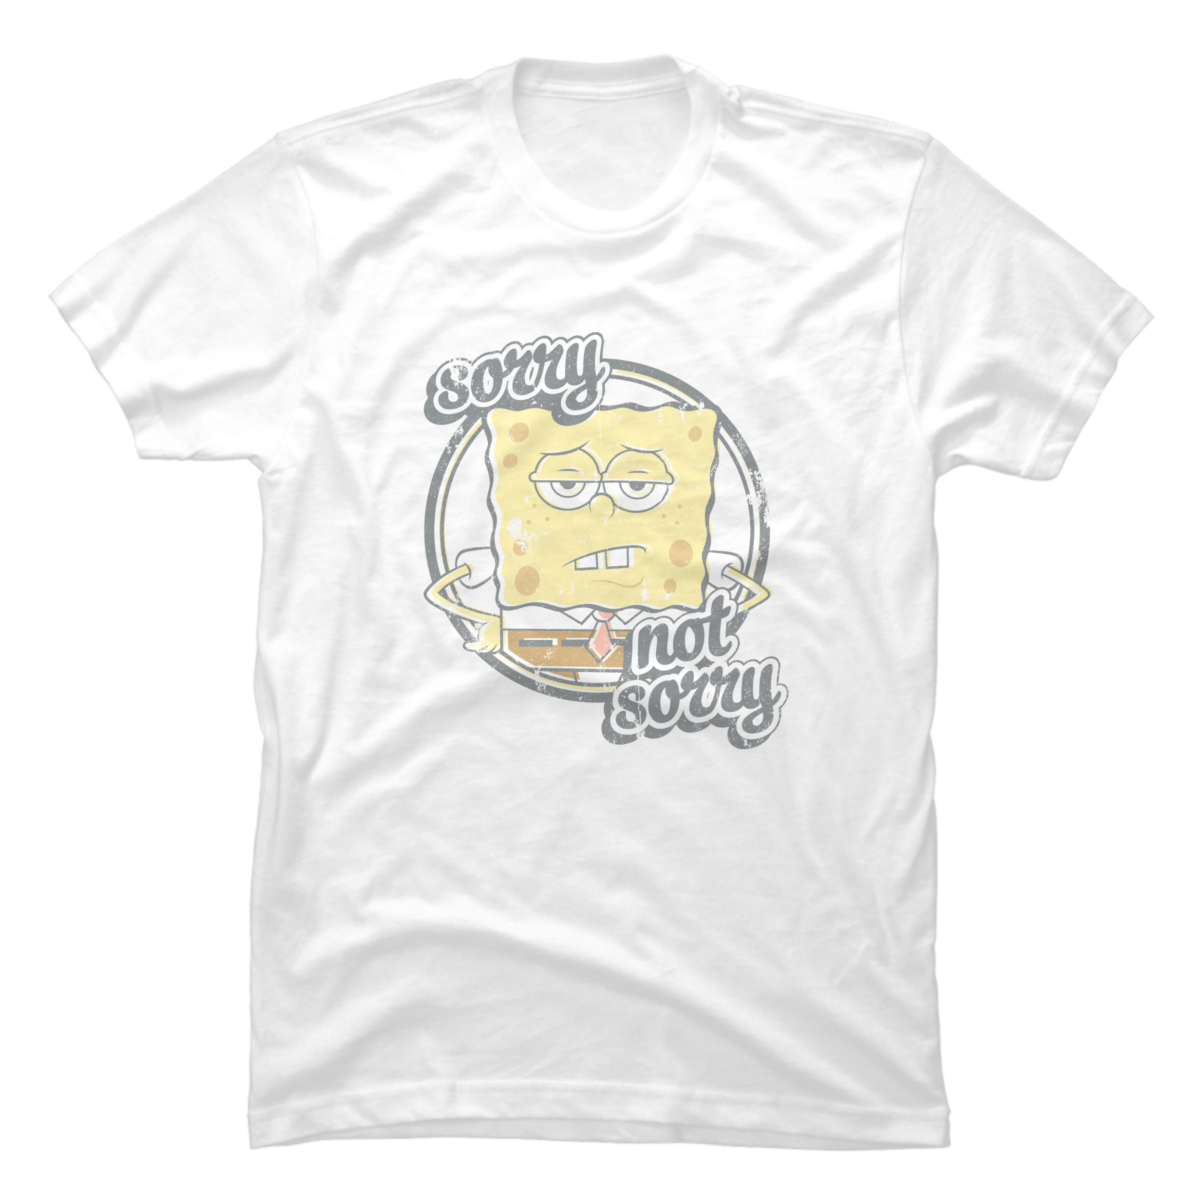 sorry not sorry t shirt